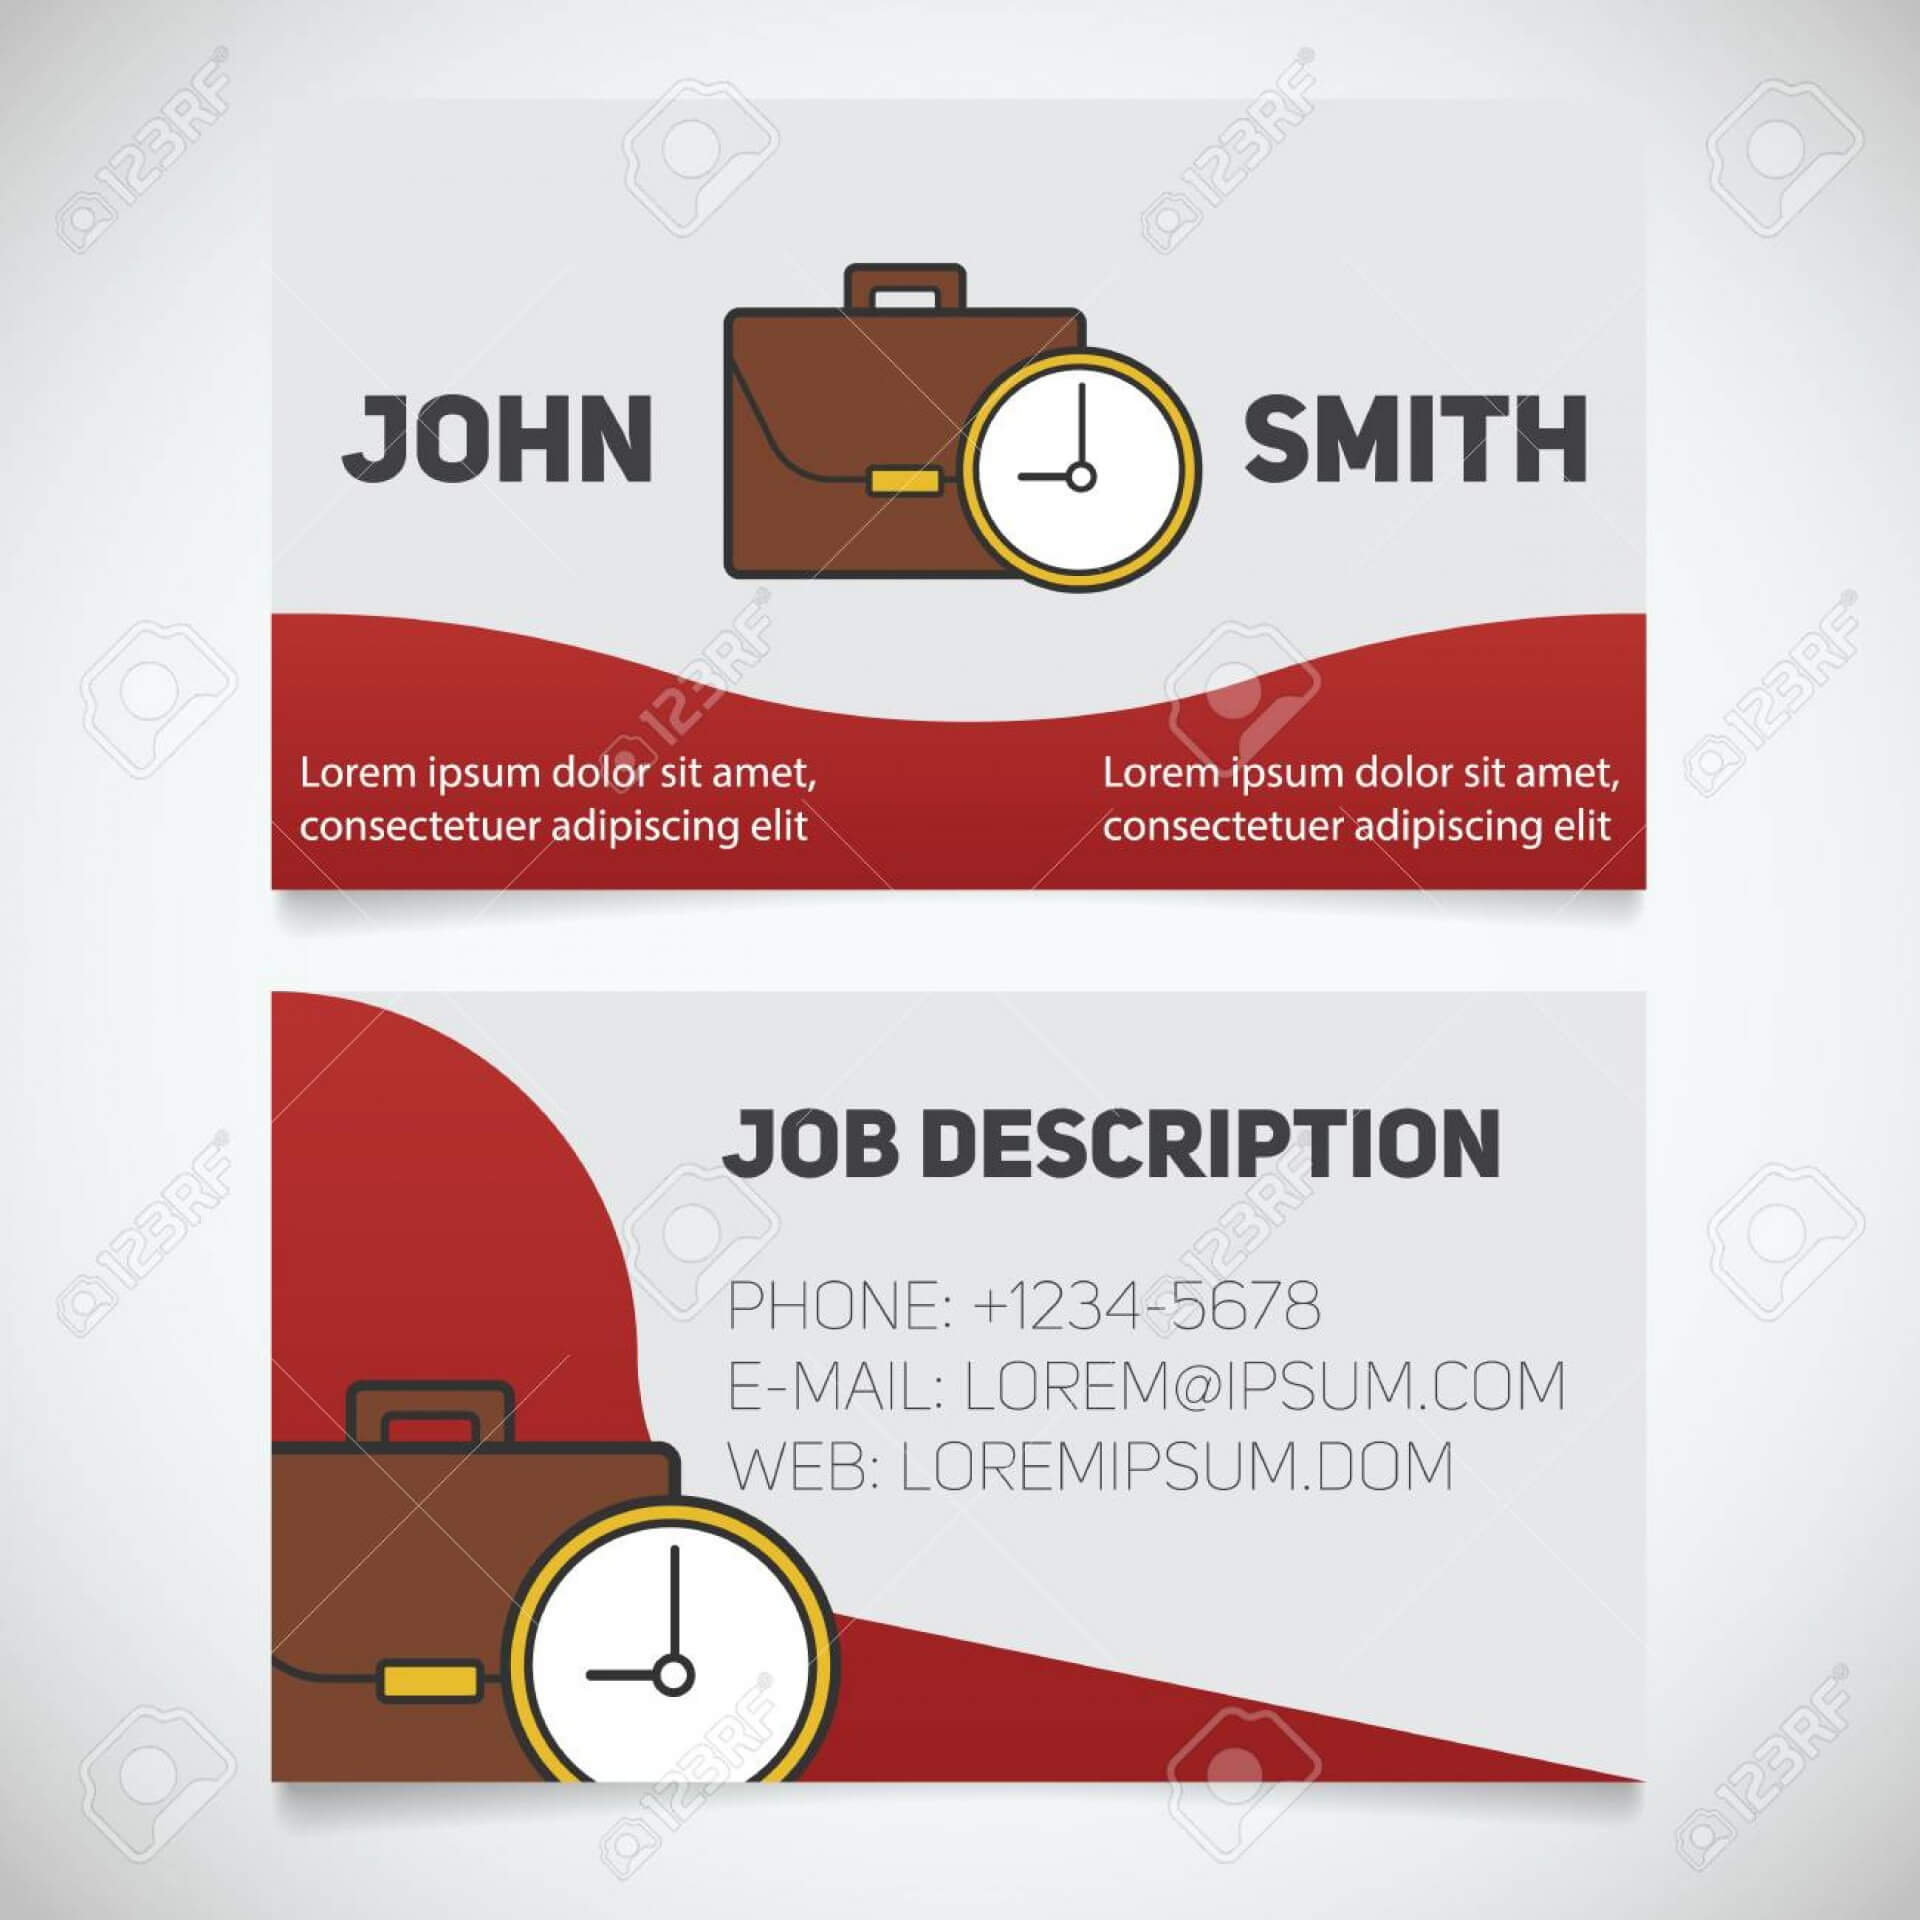 036 Office Business Card Template Ideas Phenomenal Open 8371 Throughout Office Max Business Card Template